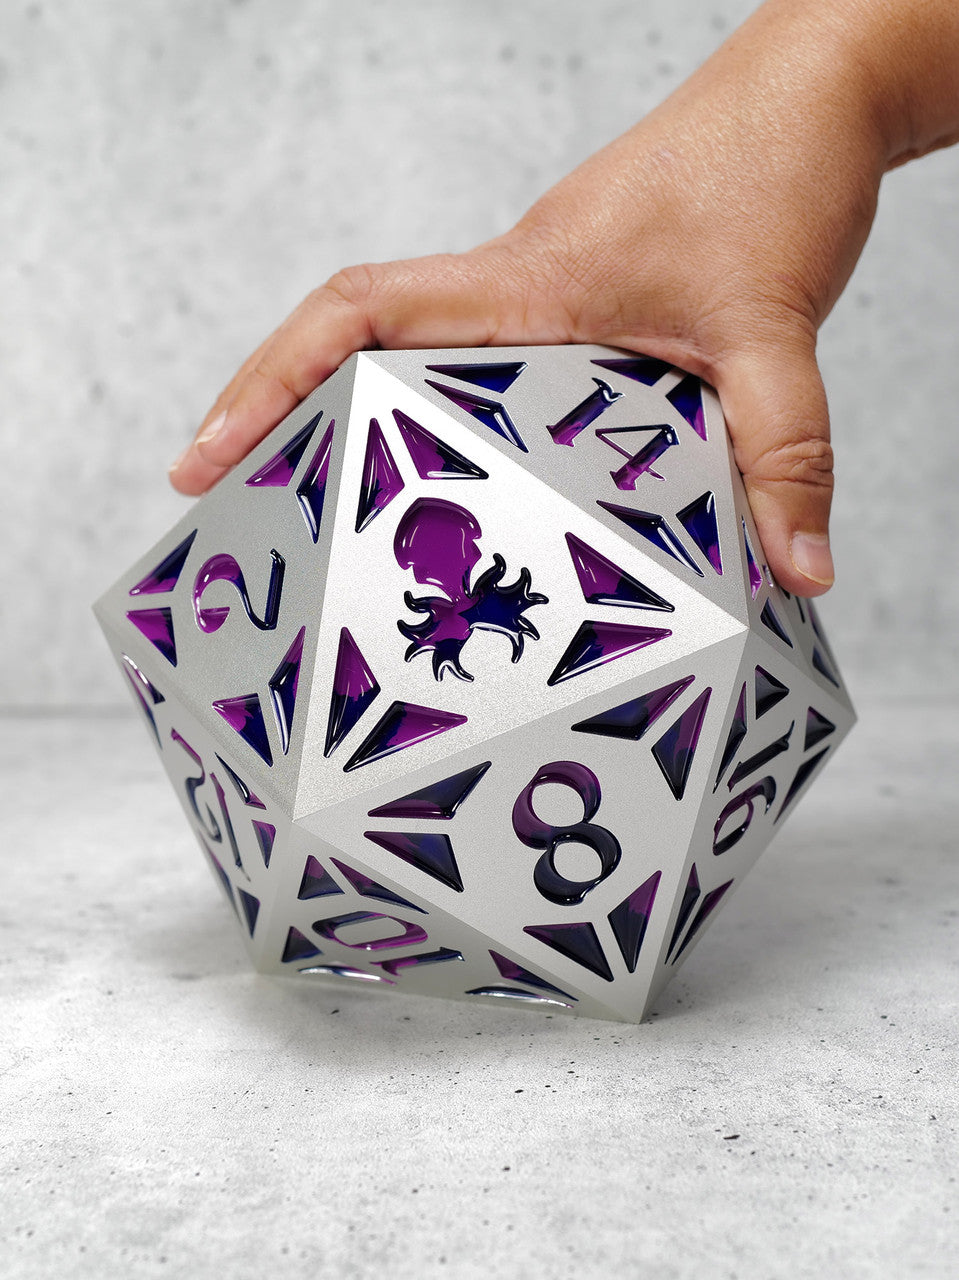 Leviathan Revival Solid Aluminum D20 inked in Purple & Blue